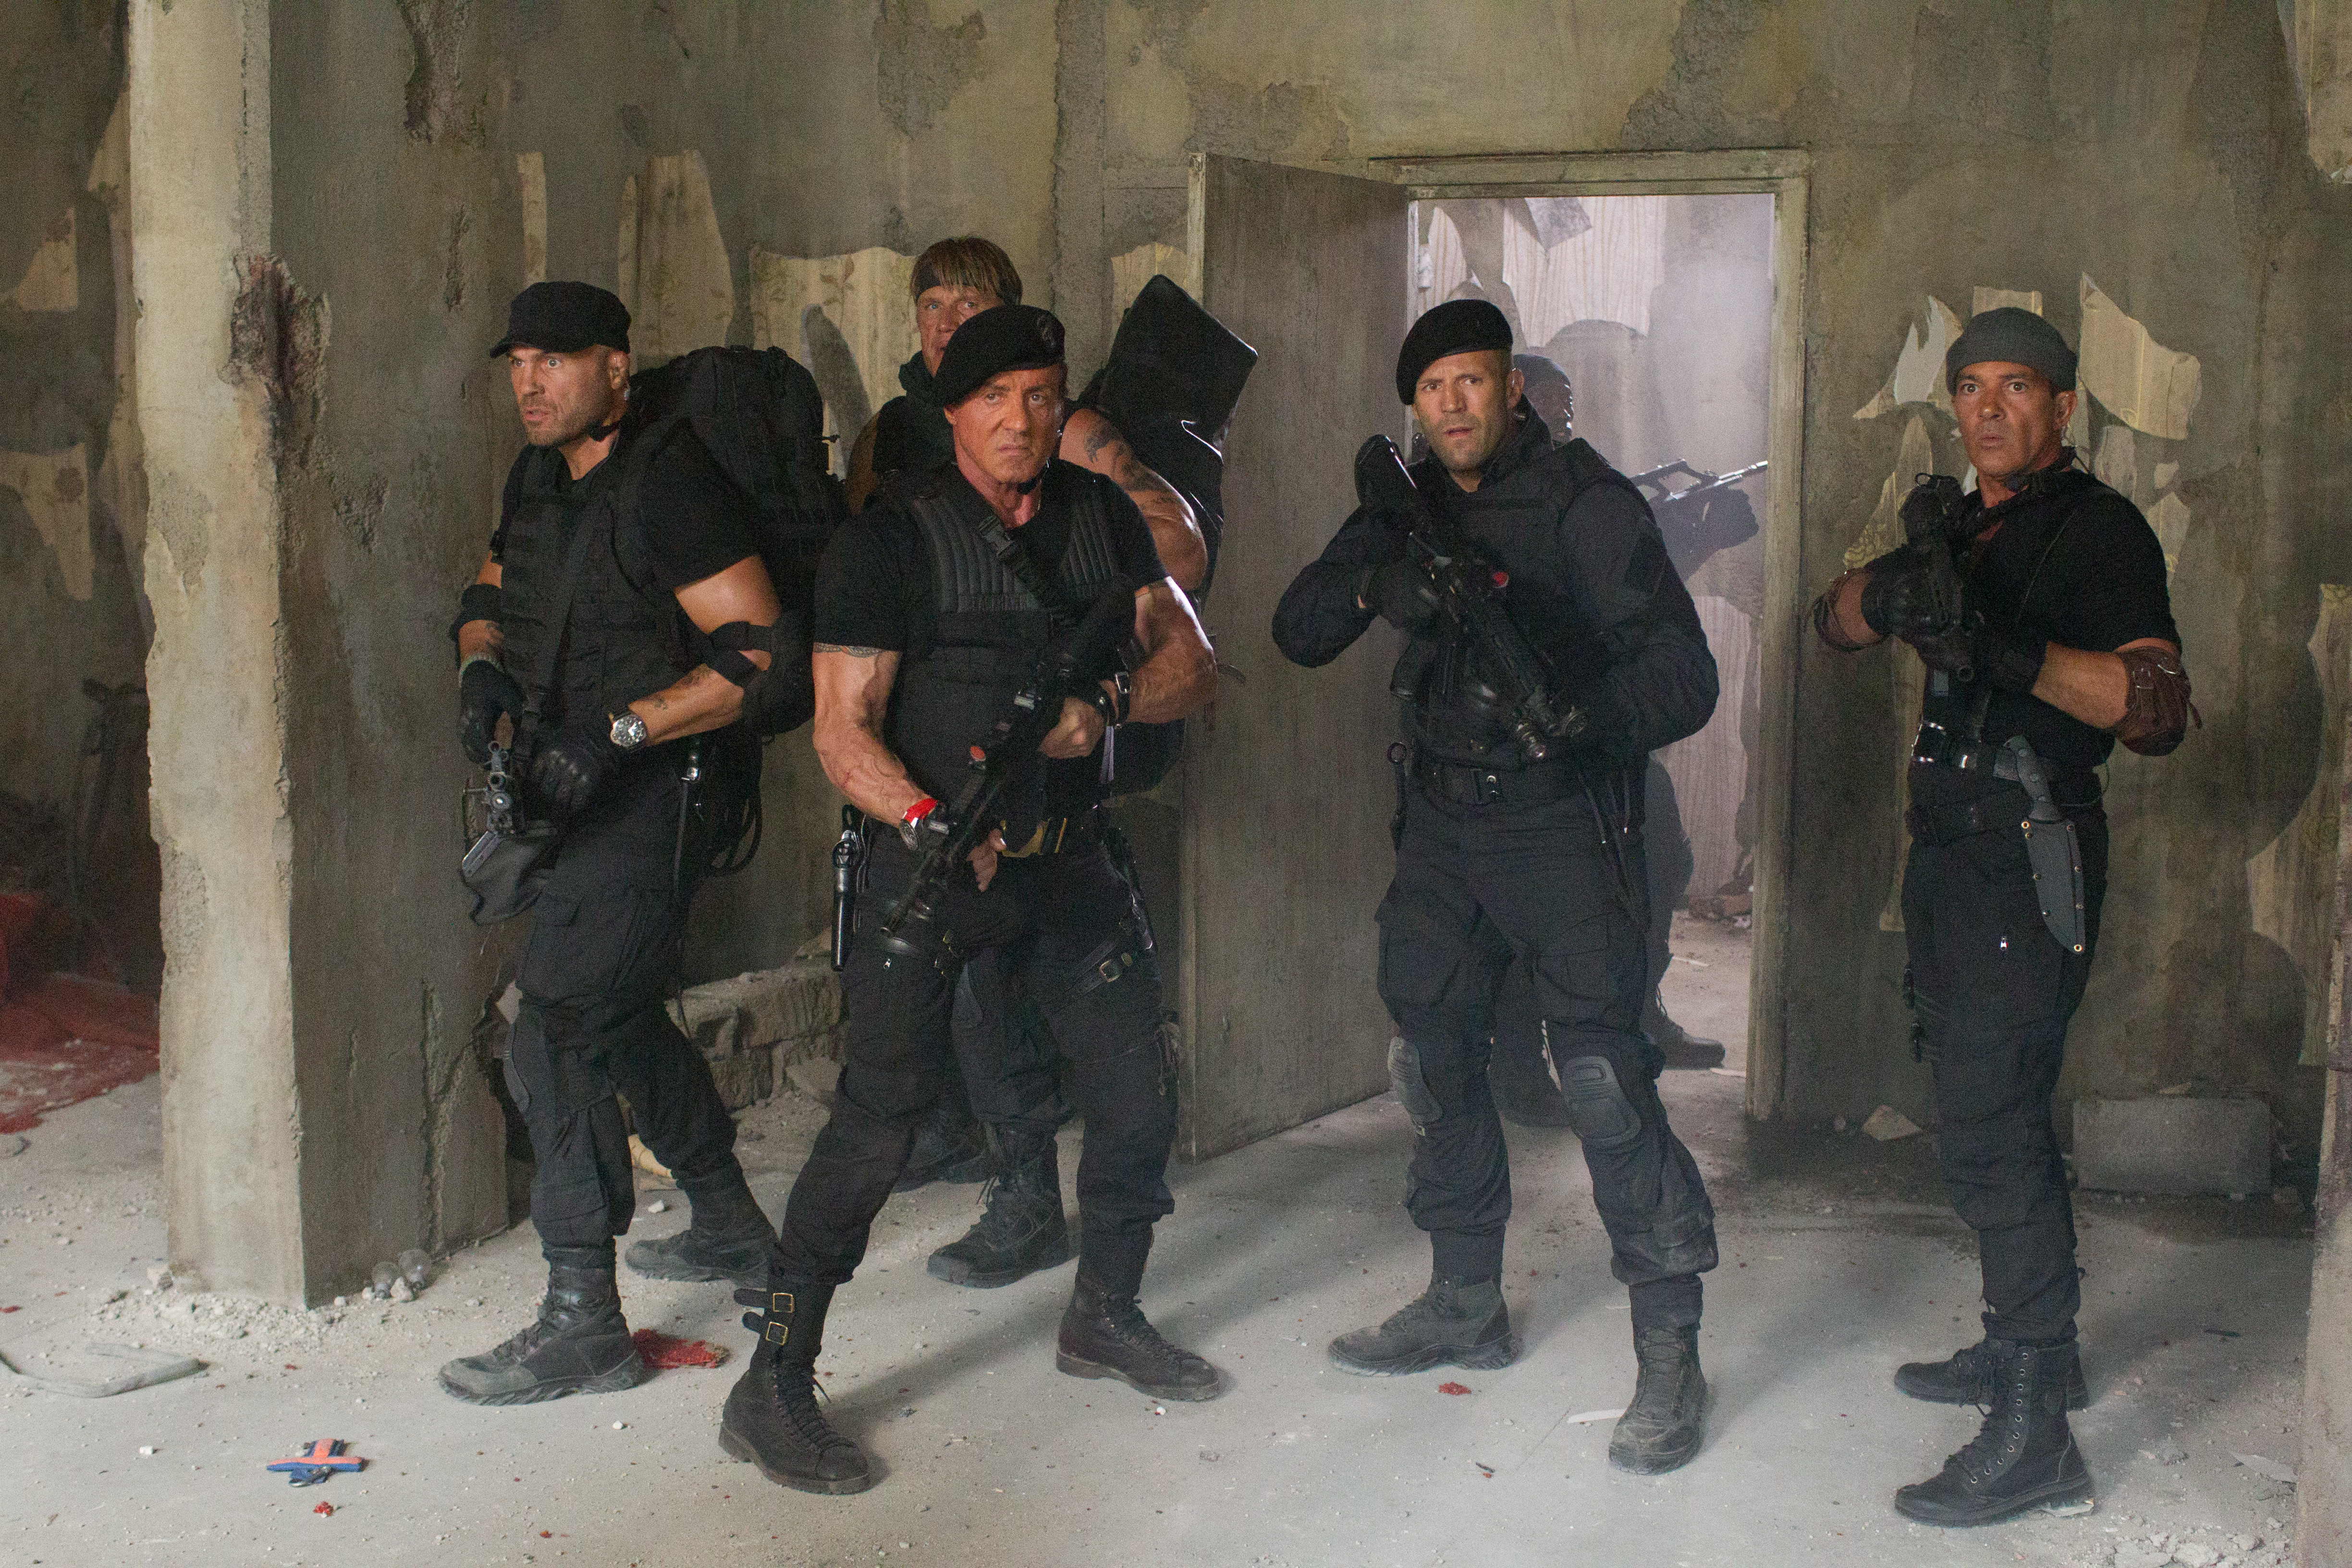 dolph lundgren, movie, the expendables 3, antonio banderas, barney ross, galgo (the expendables), gunnar jensen, jason statham, lee christmas, randy couture, sylvester stallone, toll road, the expendables